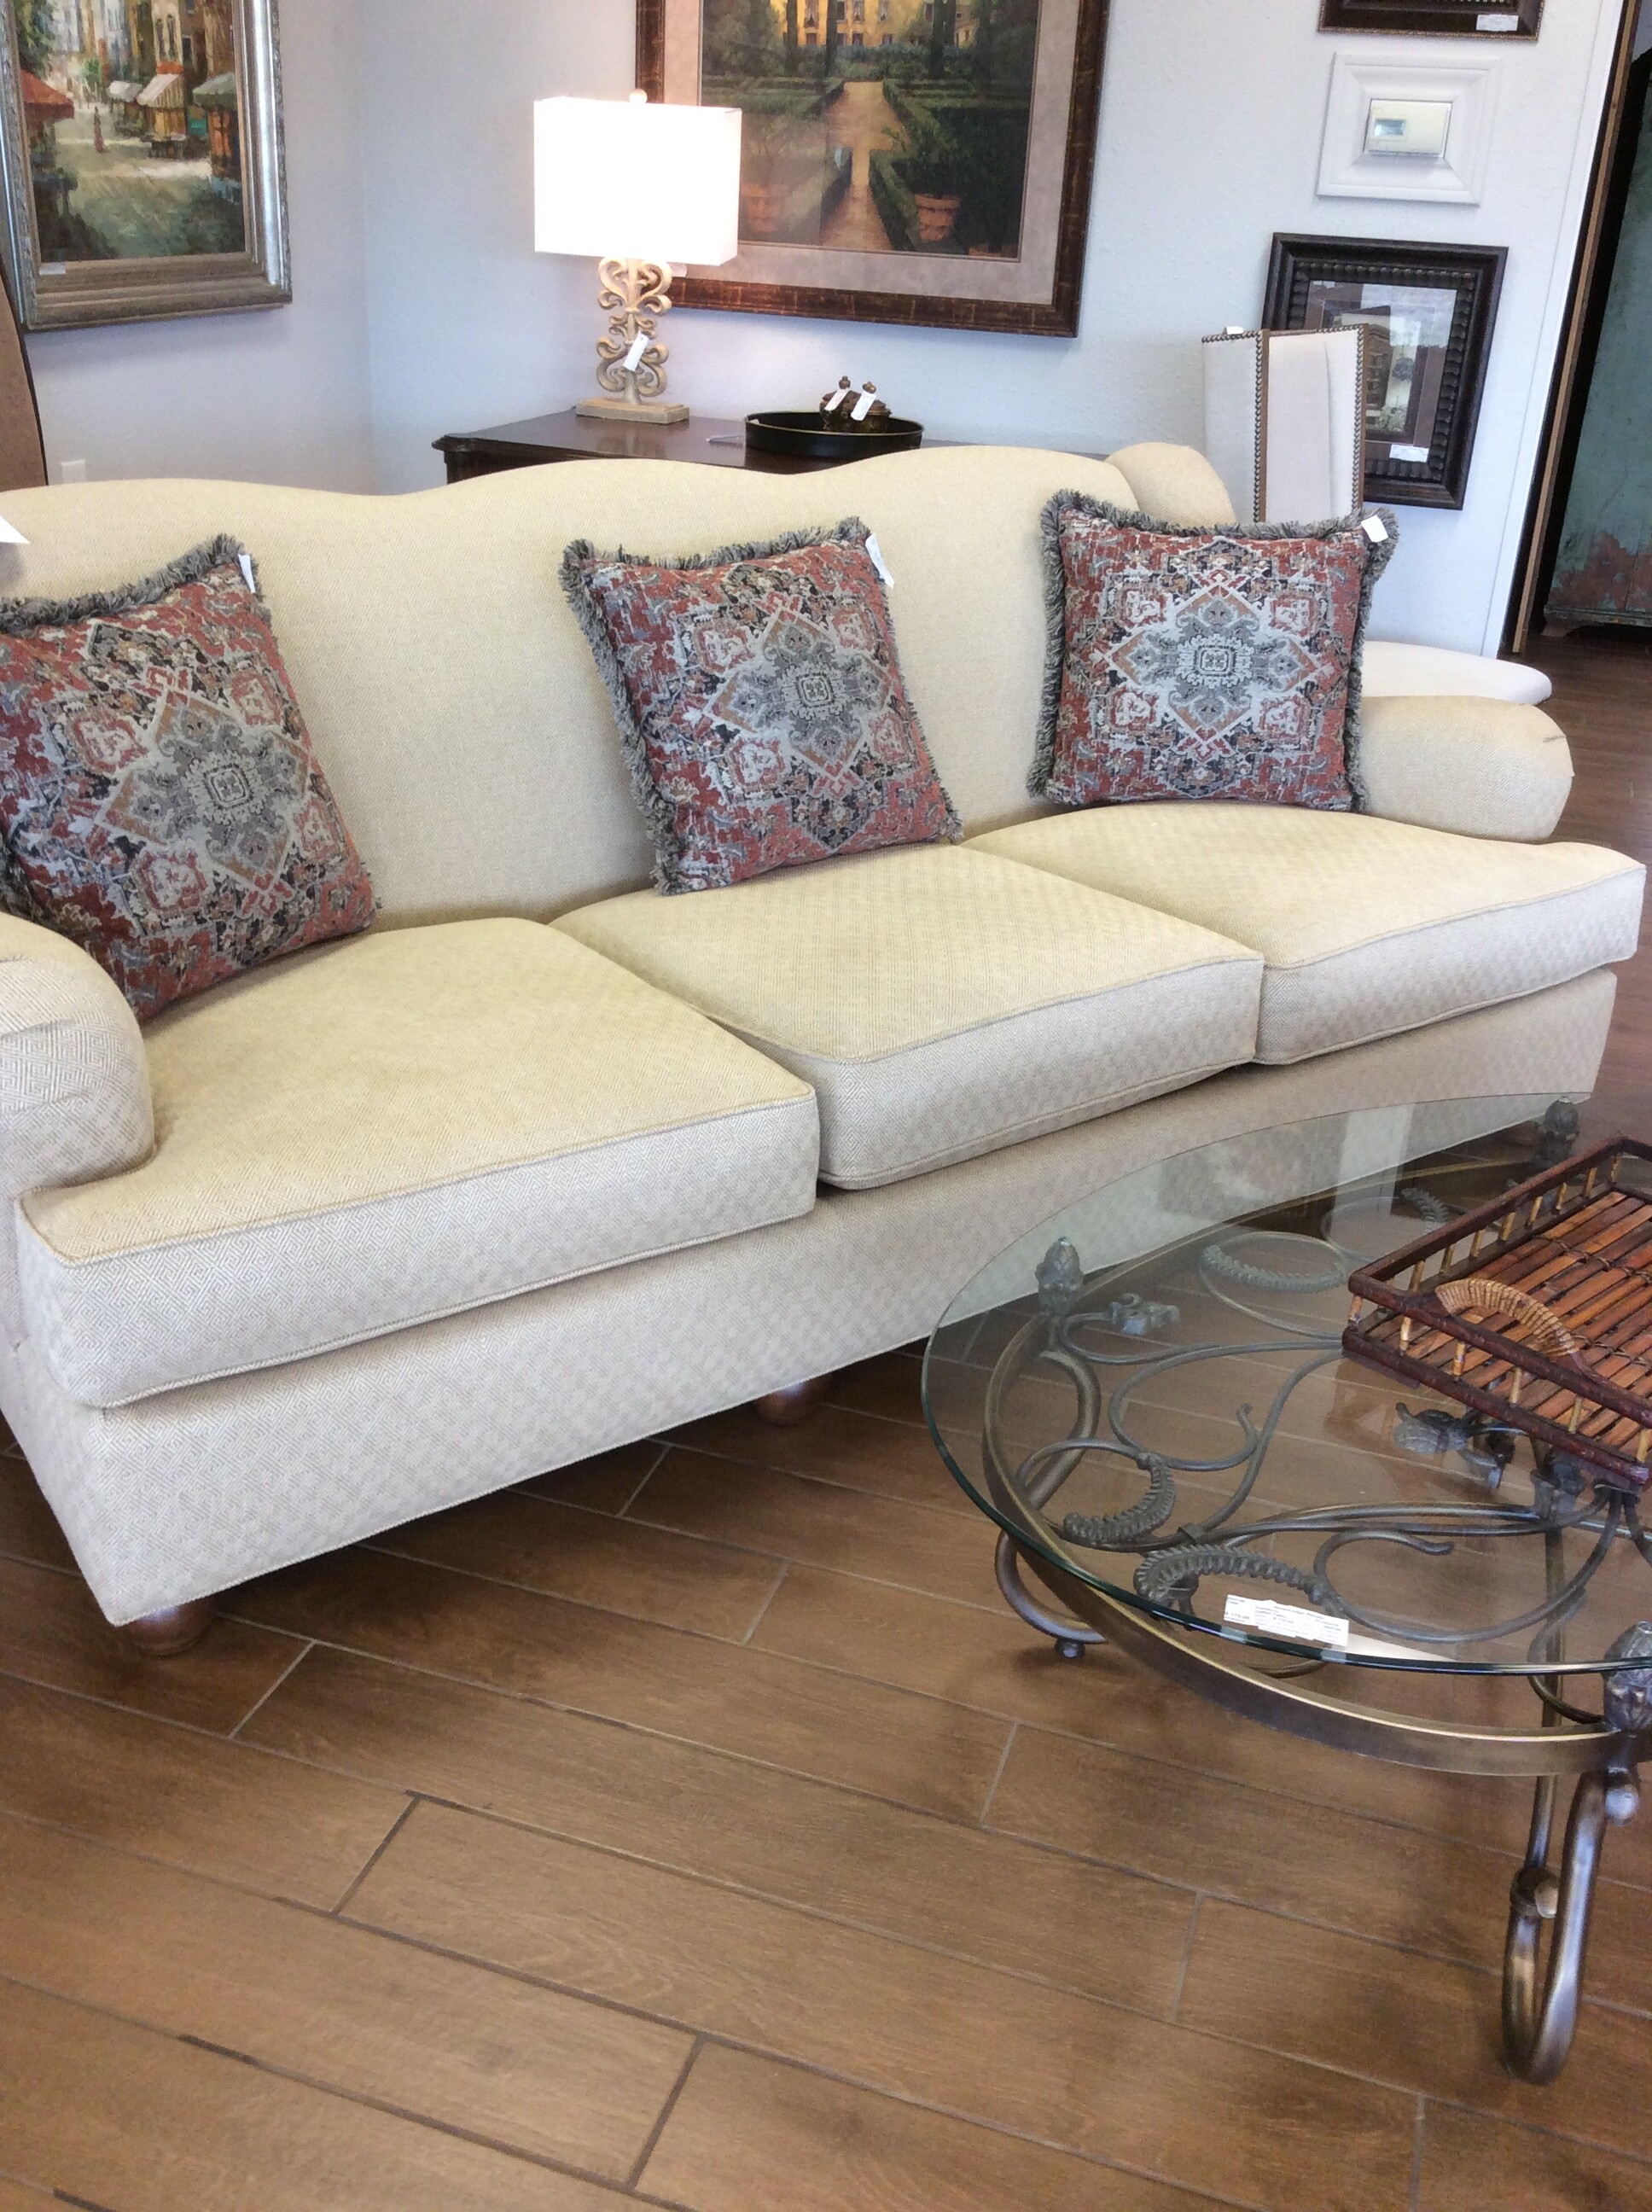 This sofa is covered in a butter cream colored fabric with a small tone on tone geometric print.